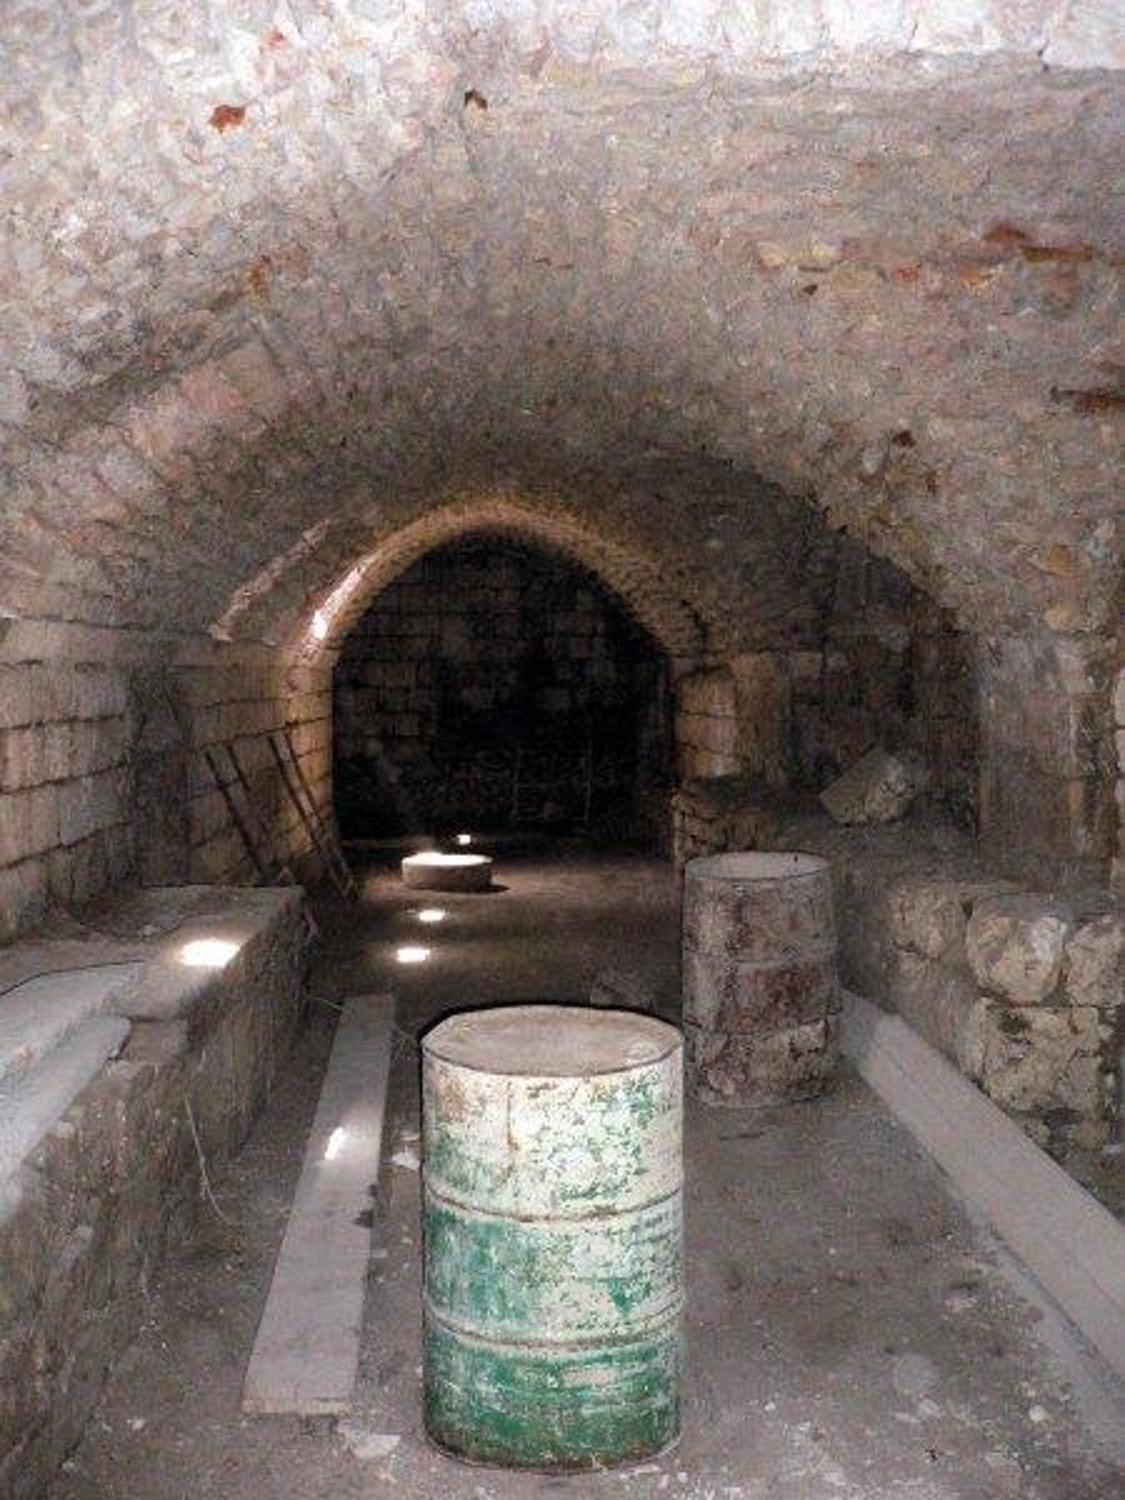 Interior view of the cellar